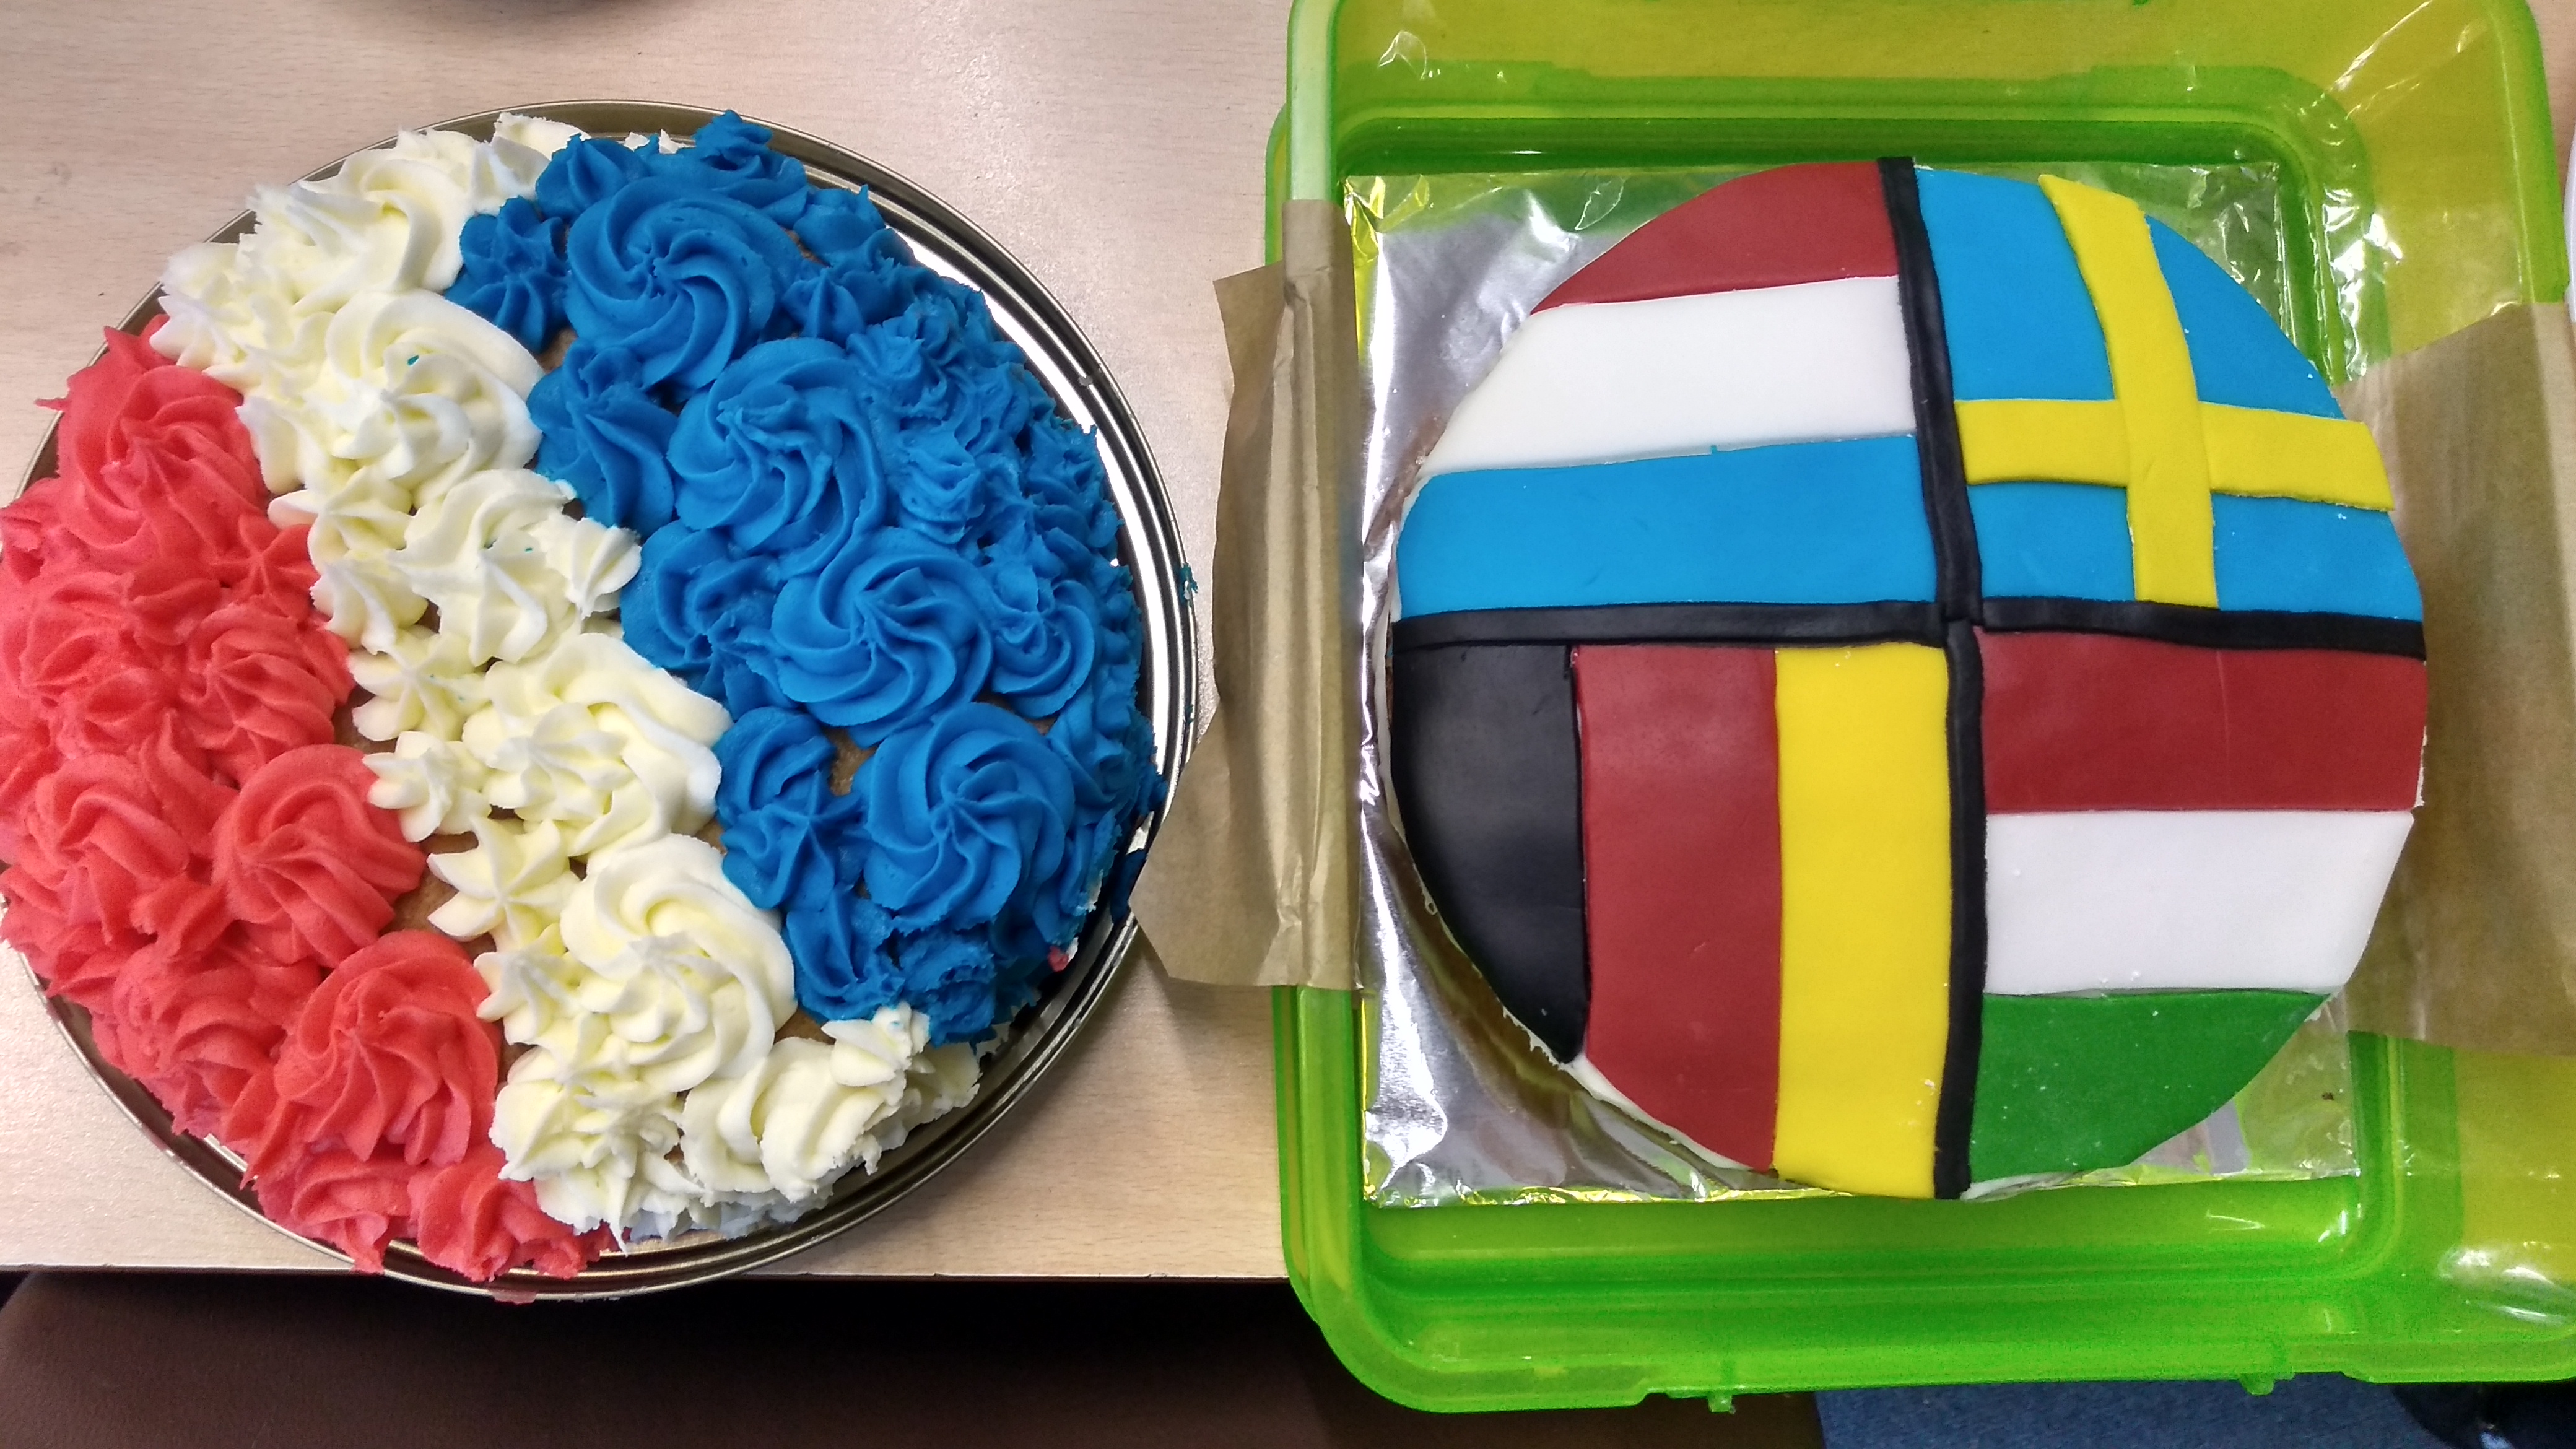 The European Day of Languages Bake Off 2019